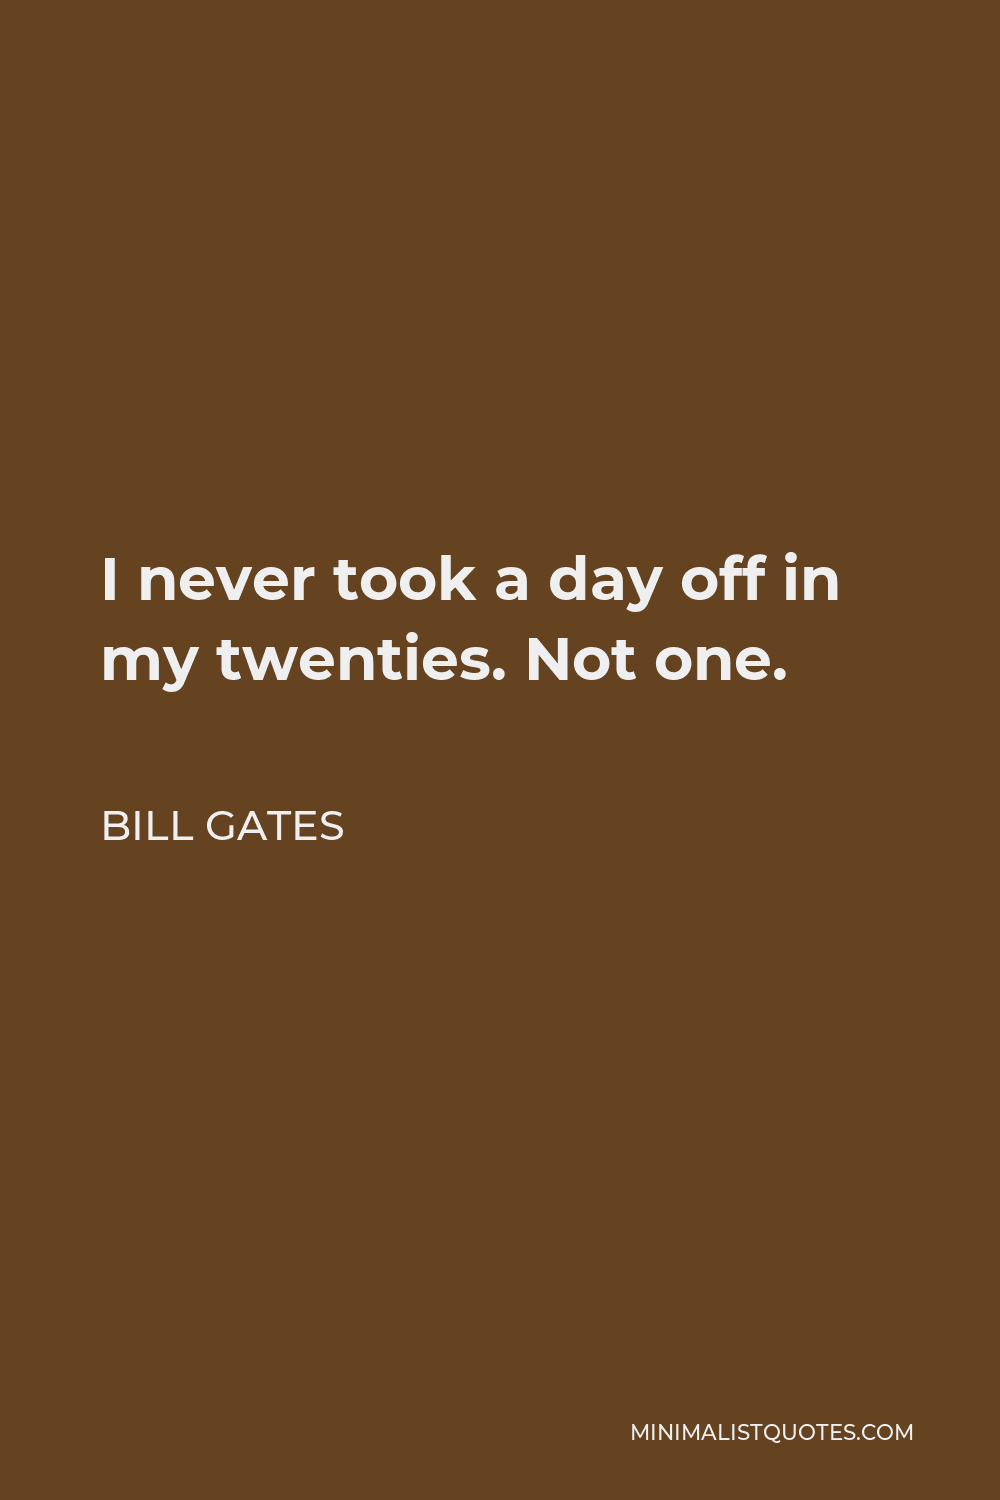 Bill Gates Quote - I never took a day off in my twenties. Not one.